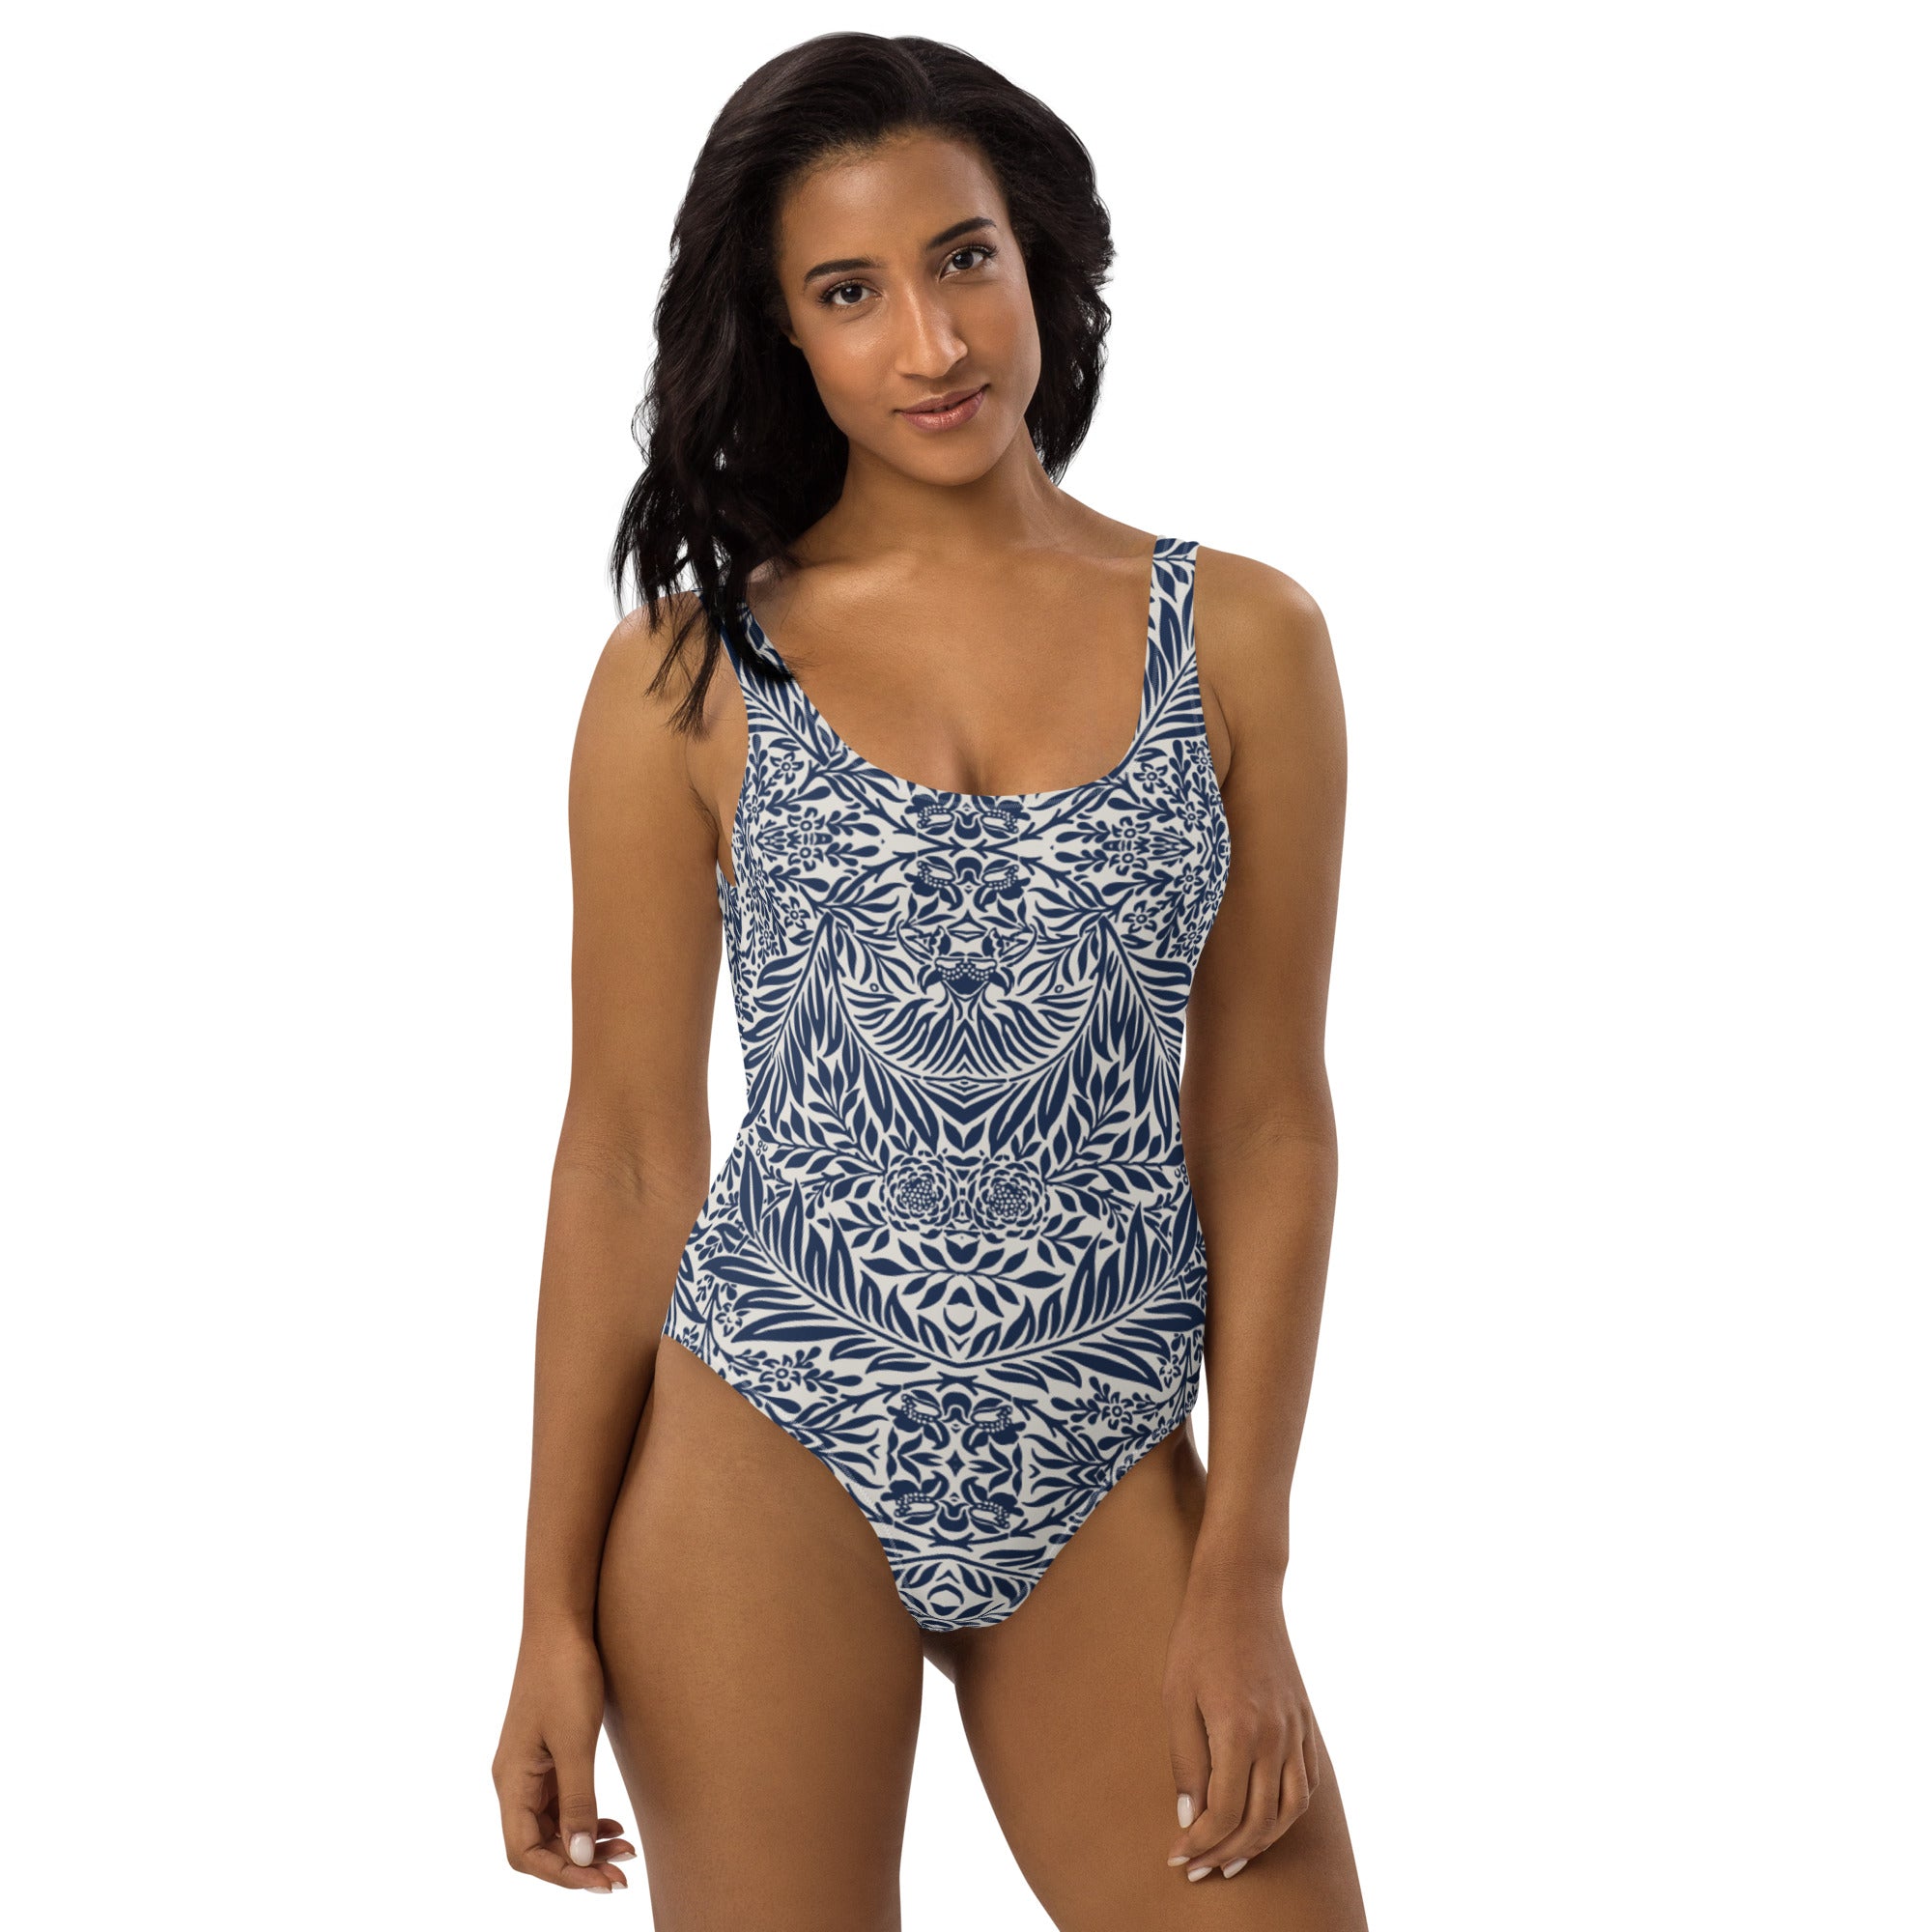 Blue and White Floral composition Stylish One-Piece Swimsuit, by Sensus Studio Design